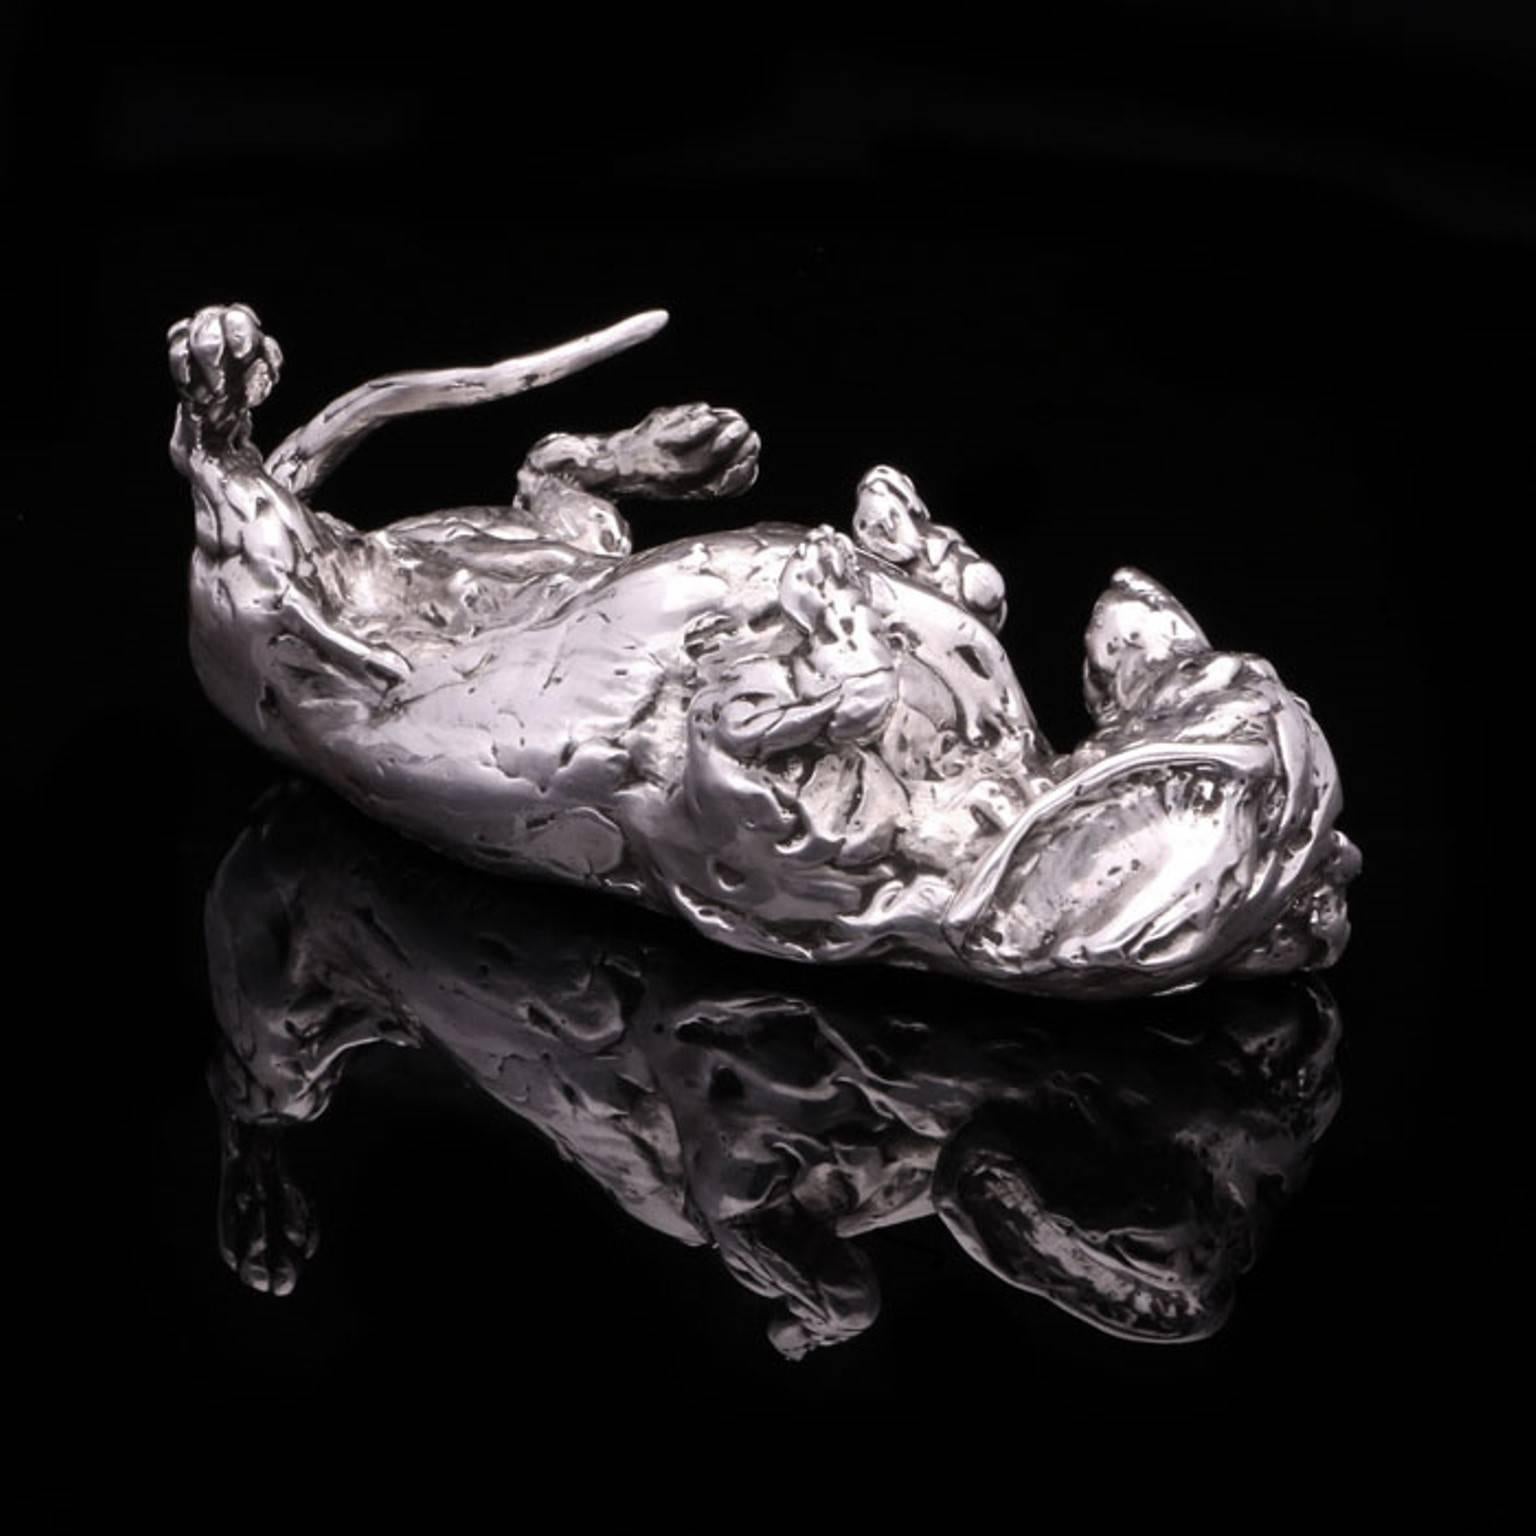 'Rolling terrier' sterling silver sculpture - Sculpture by Lucy Kinsella